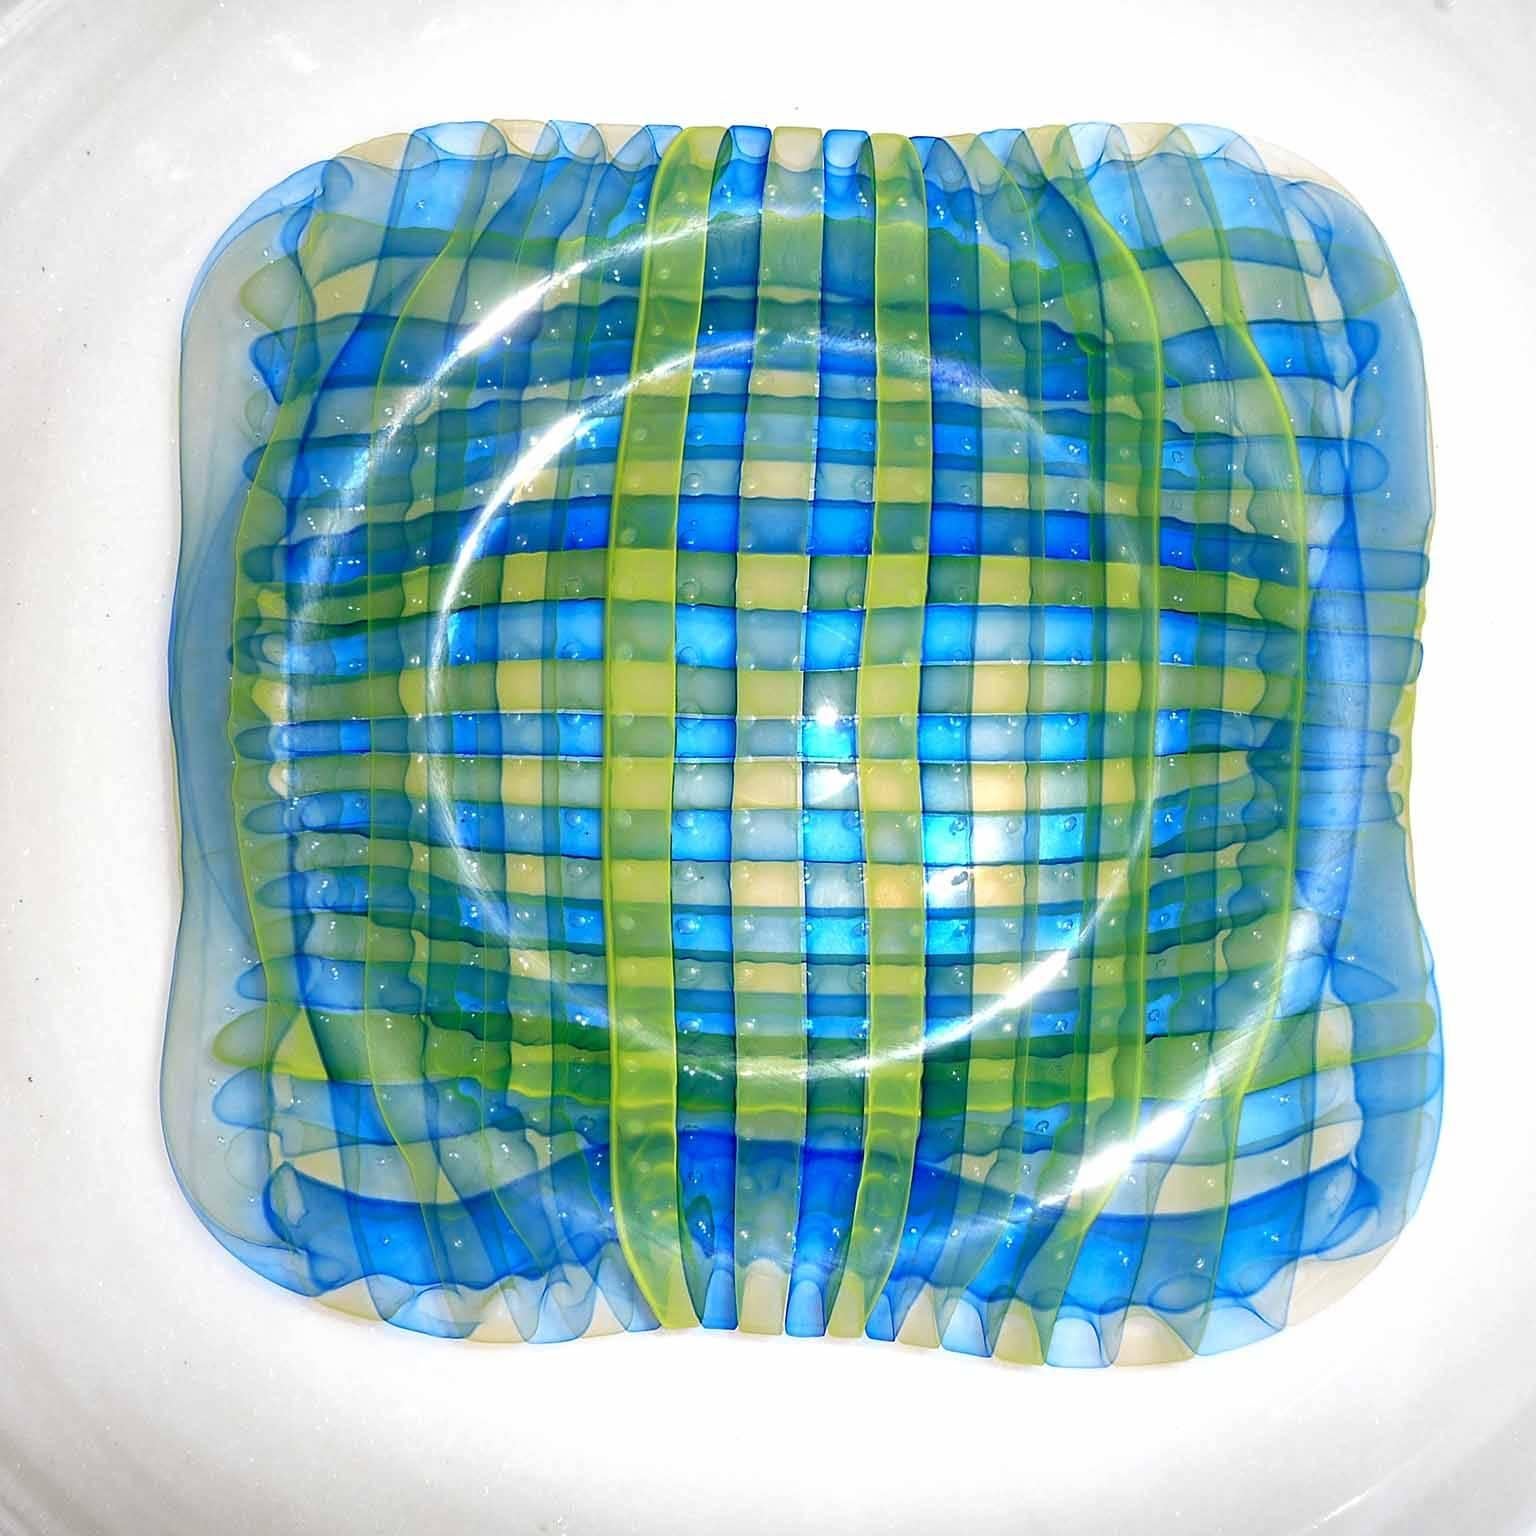 Huge decorative glass plate by Gary Beecham (b. 1955 Ladysmith, Wisconsin)

Colorless cameo glass, with two-layer band pattern in center, like a yellow and blue checkered cloth. Brushed stainless steel holder.
Signed and dated under the bottom